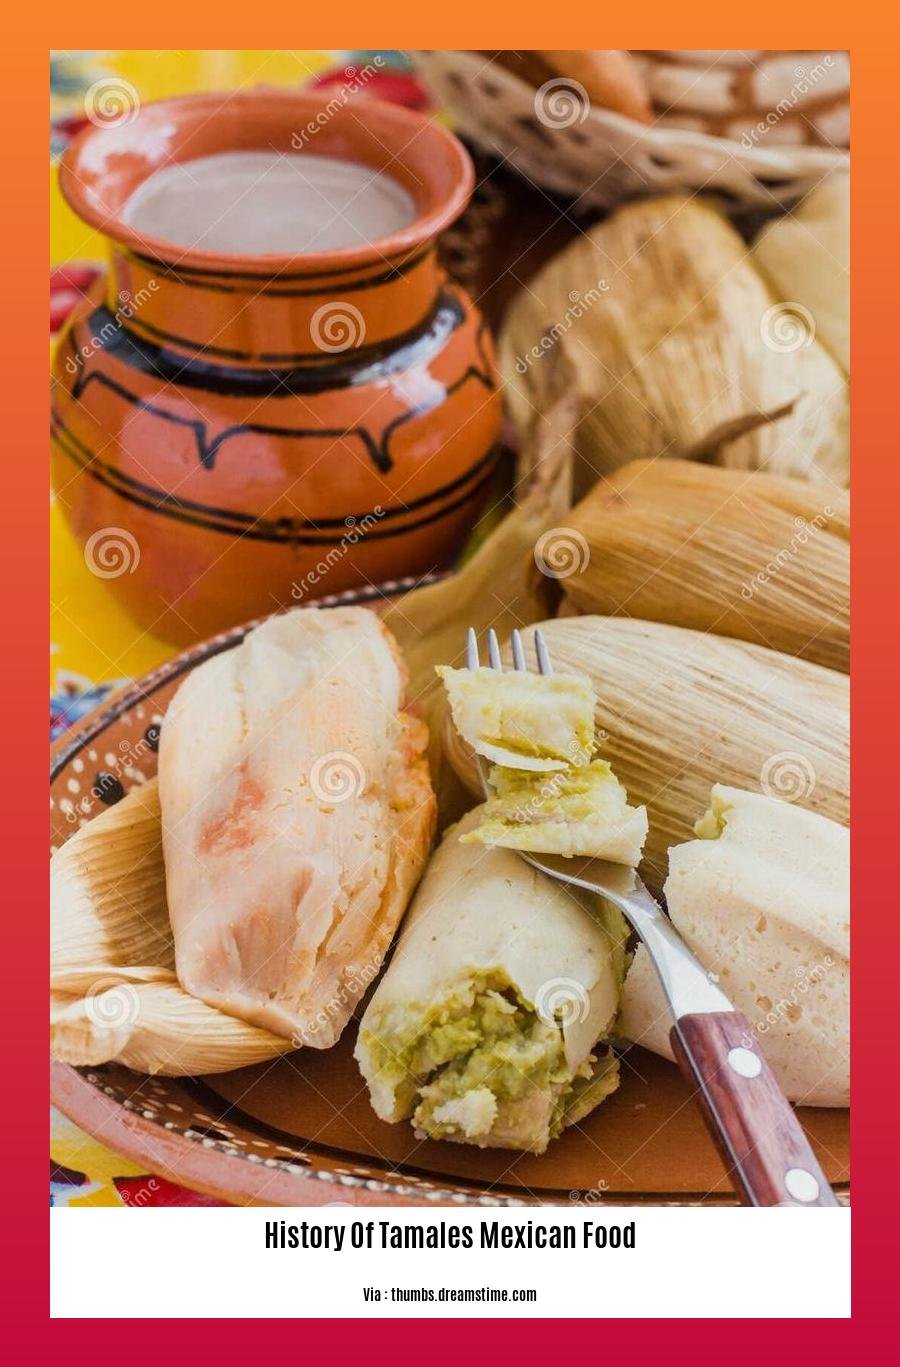 history of tamales mexican food 2